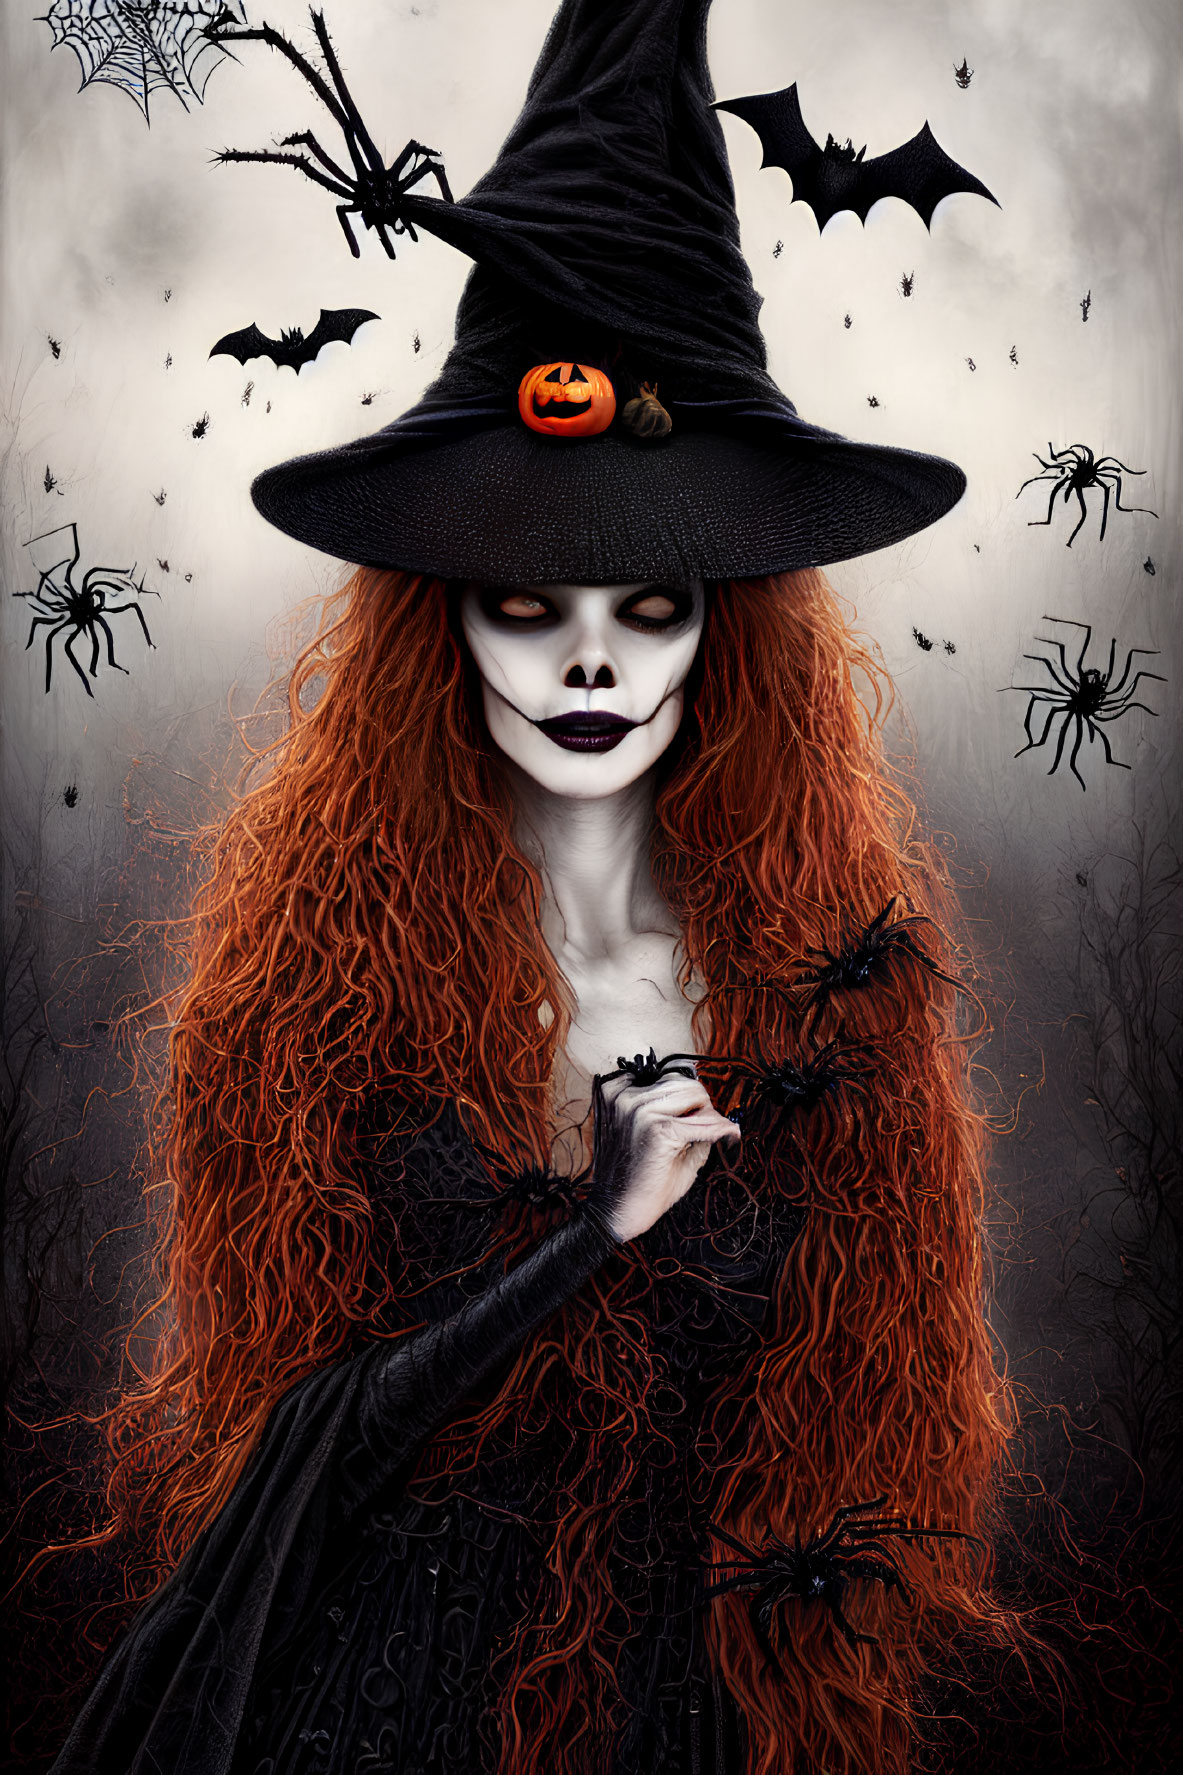 Person in witch costume with hat, white face makeup, red hair, bats, spiders, spooky background